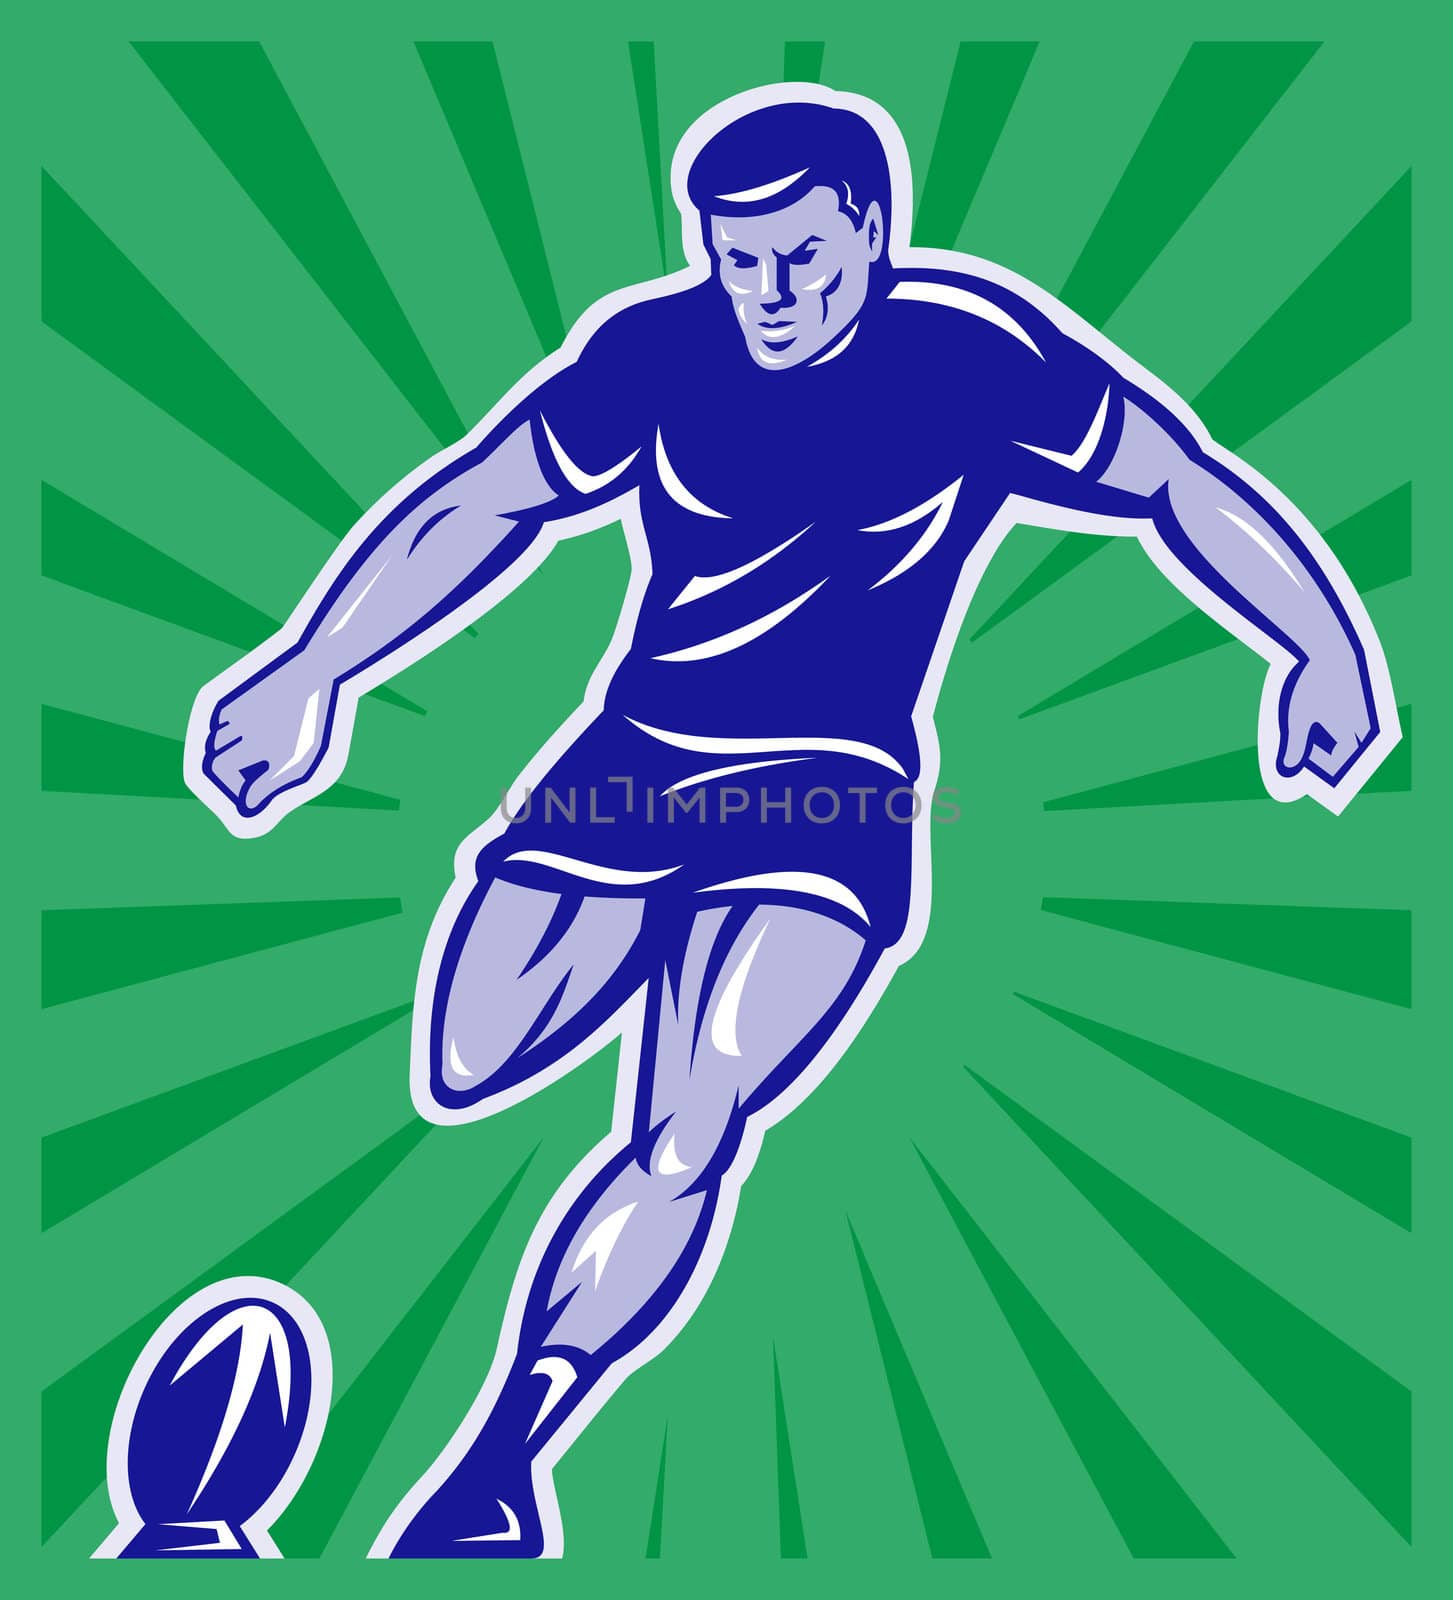 illustration of a rugby player kicking ball front view with sunburst in background done in retro style